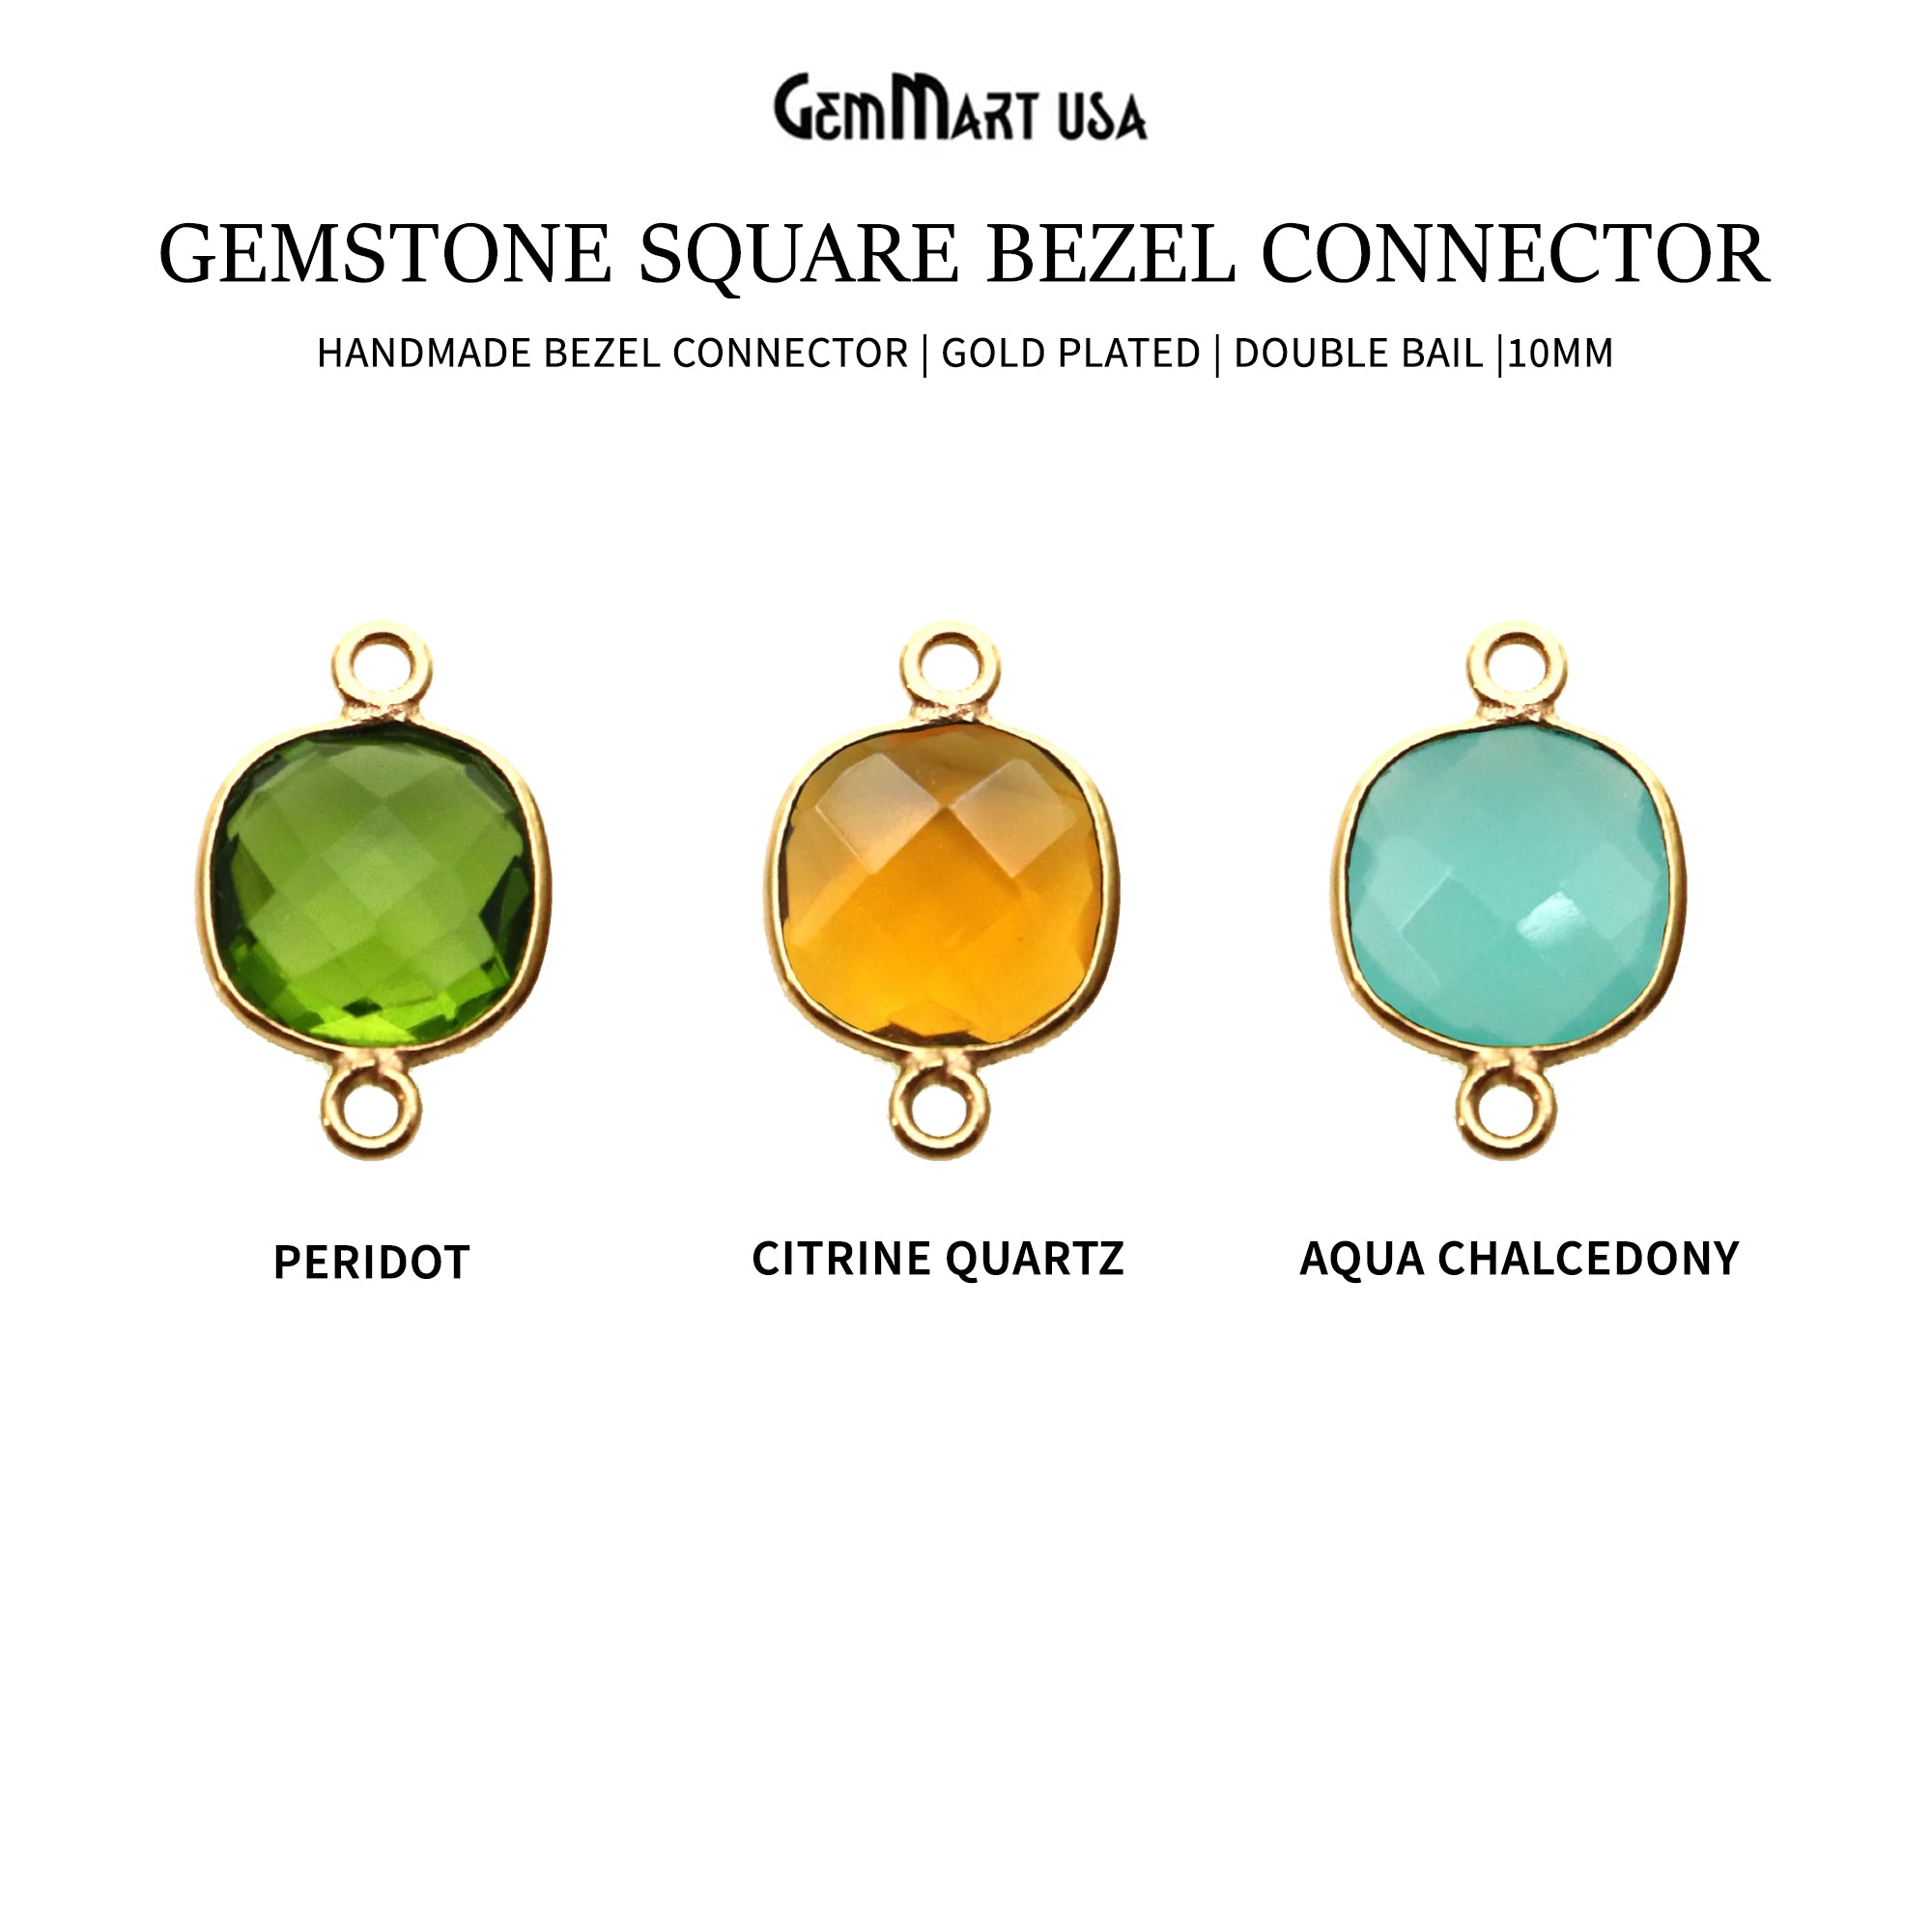 Gemstone Square 10mm Gold Plated Double Bail bezel Gemstone Connector